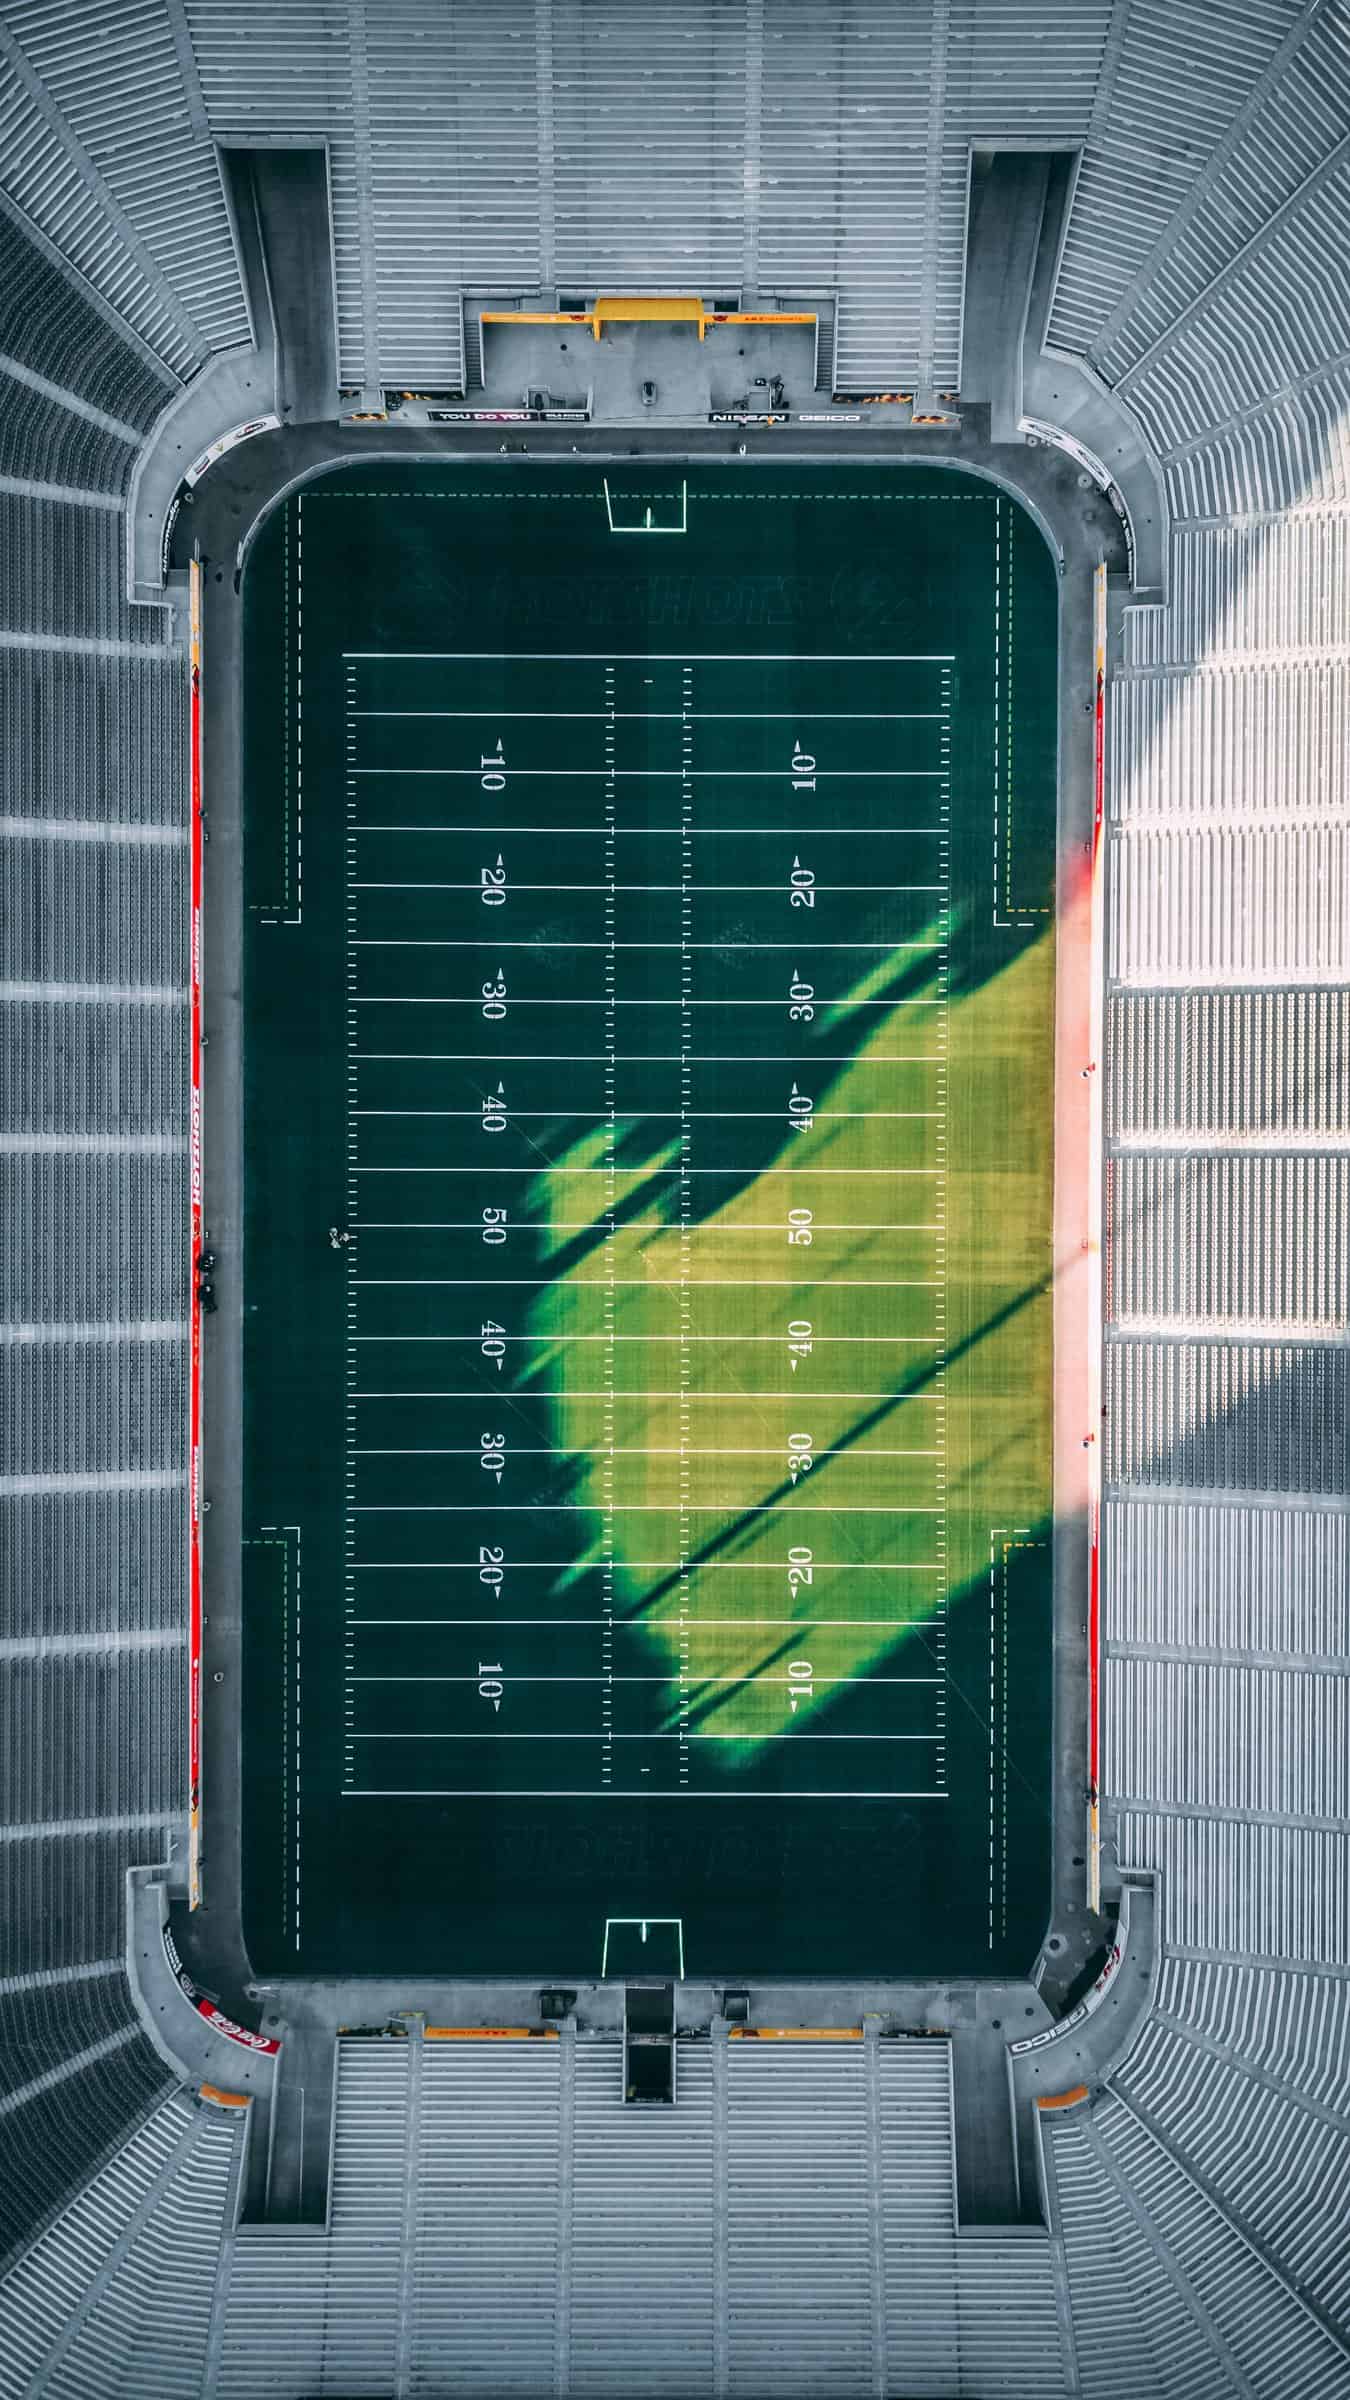 Ariel view of a football field in a stadium